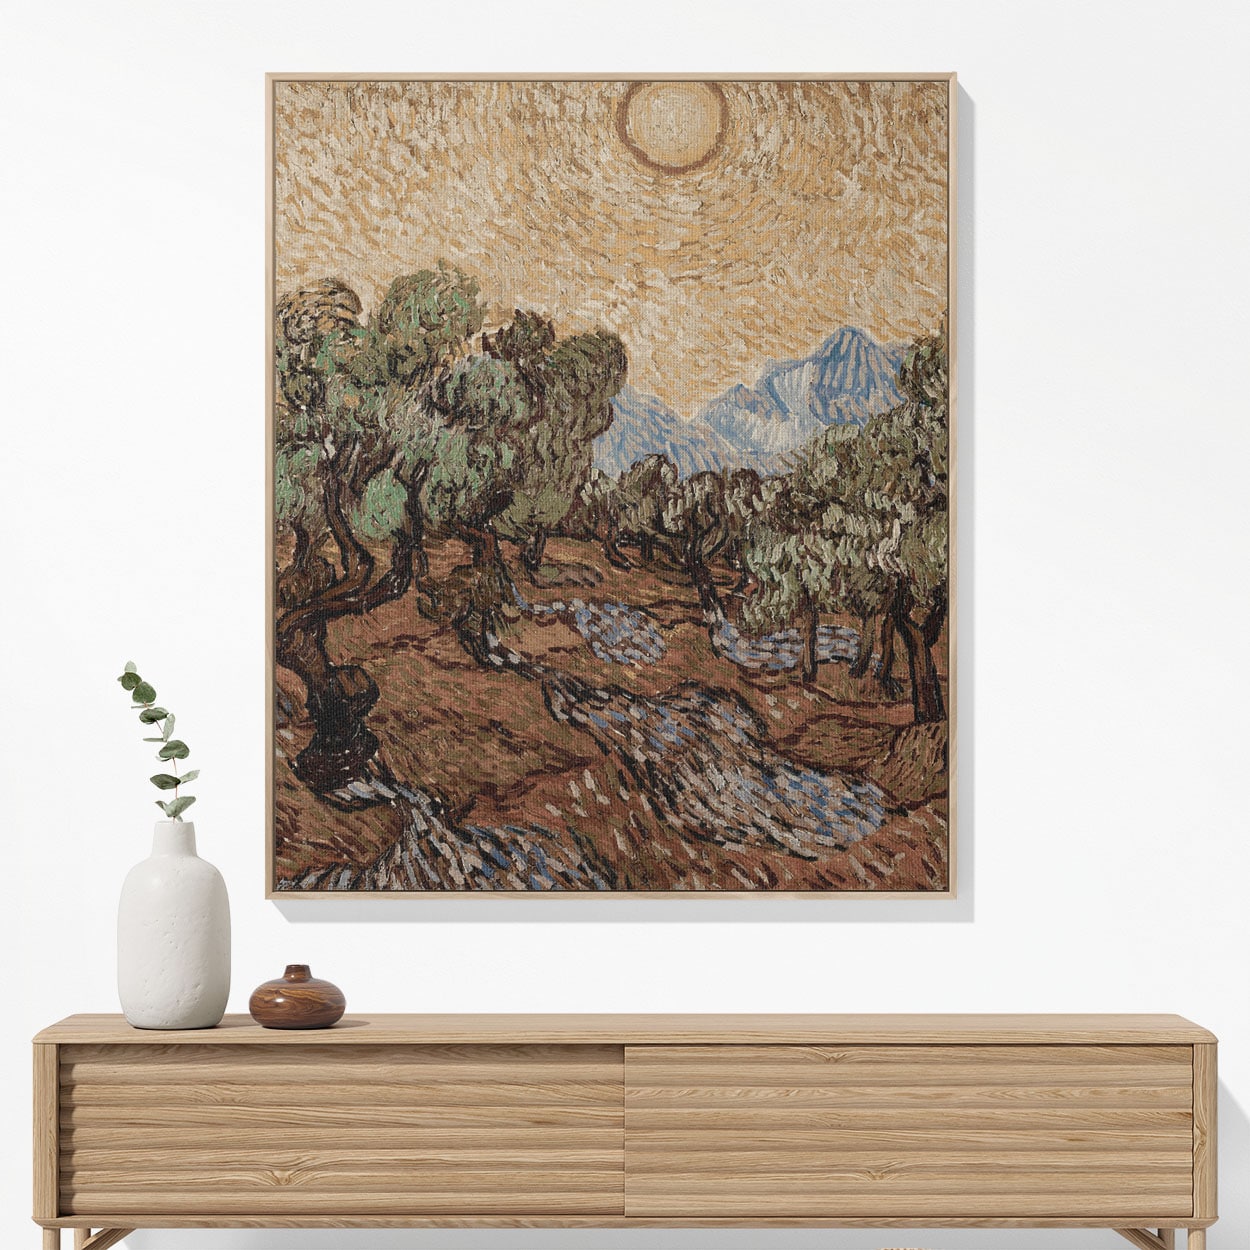 Nature Woven Blanket Hanging on a Wall as Framed Wall Art